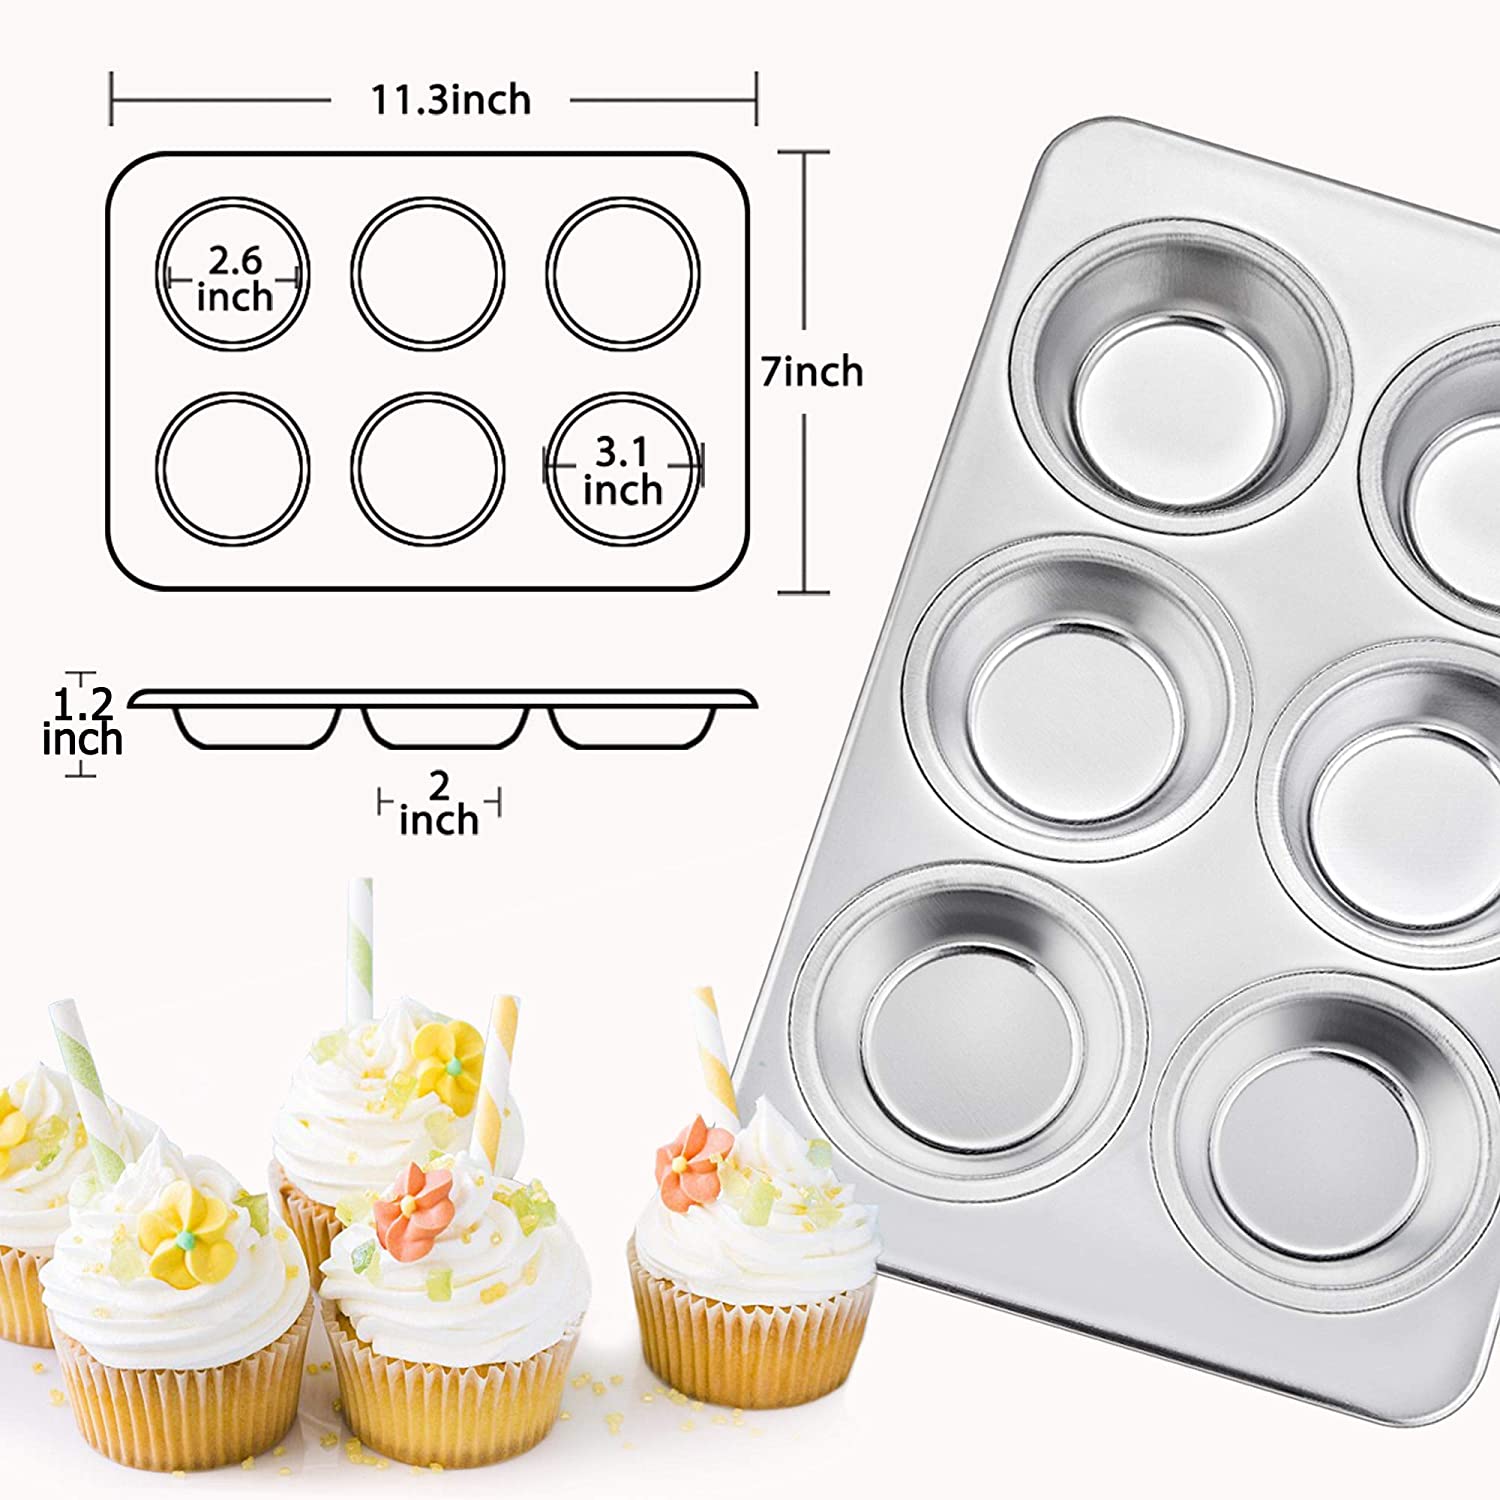 P&P CHEF Muffin Pan Cupcake Pans Set of 2, Stainless Steel Muffin Pans  (6-Cups), For Mini Brownie Tart Quiches, Healthy & Durable, Quick Release 